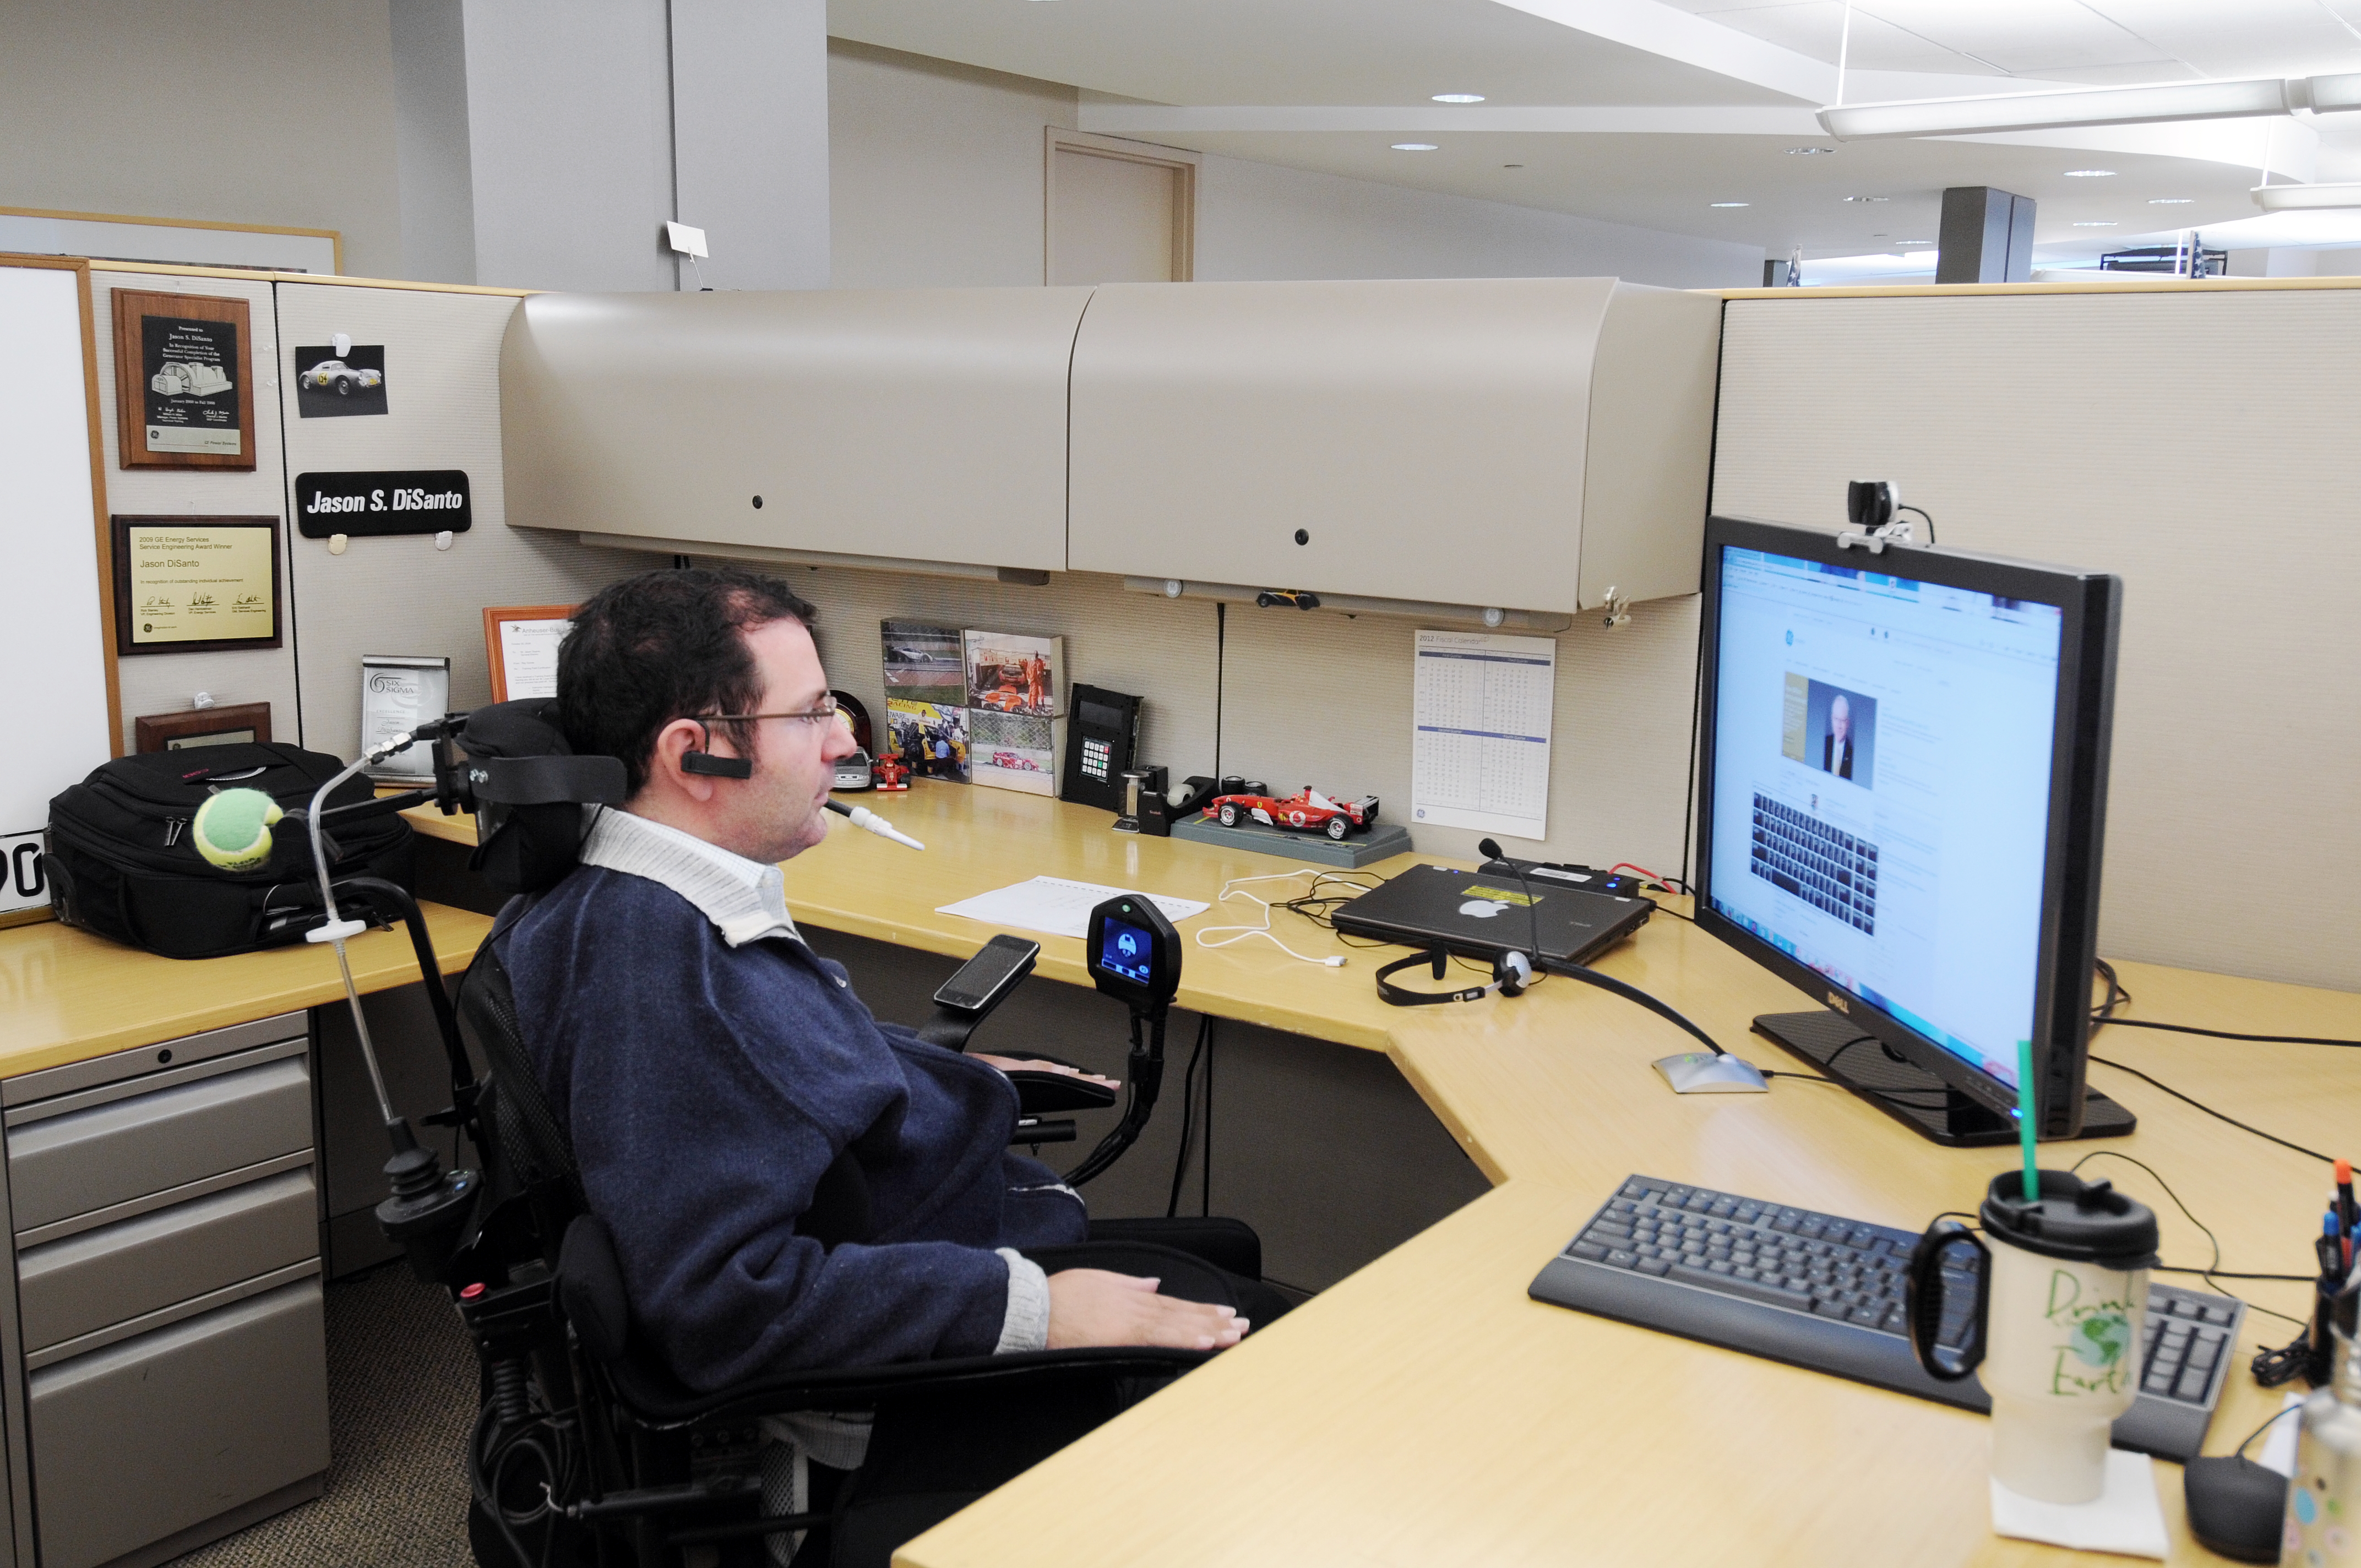 Former Shepherd Center patient Jason Disanto returns to work following rehabilitation for a high-level spinal cord injury